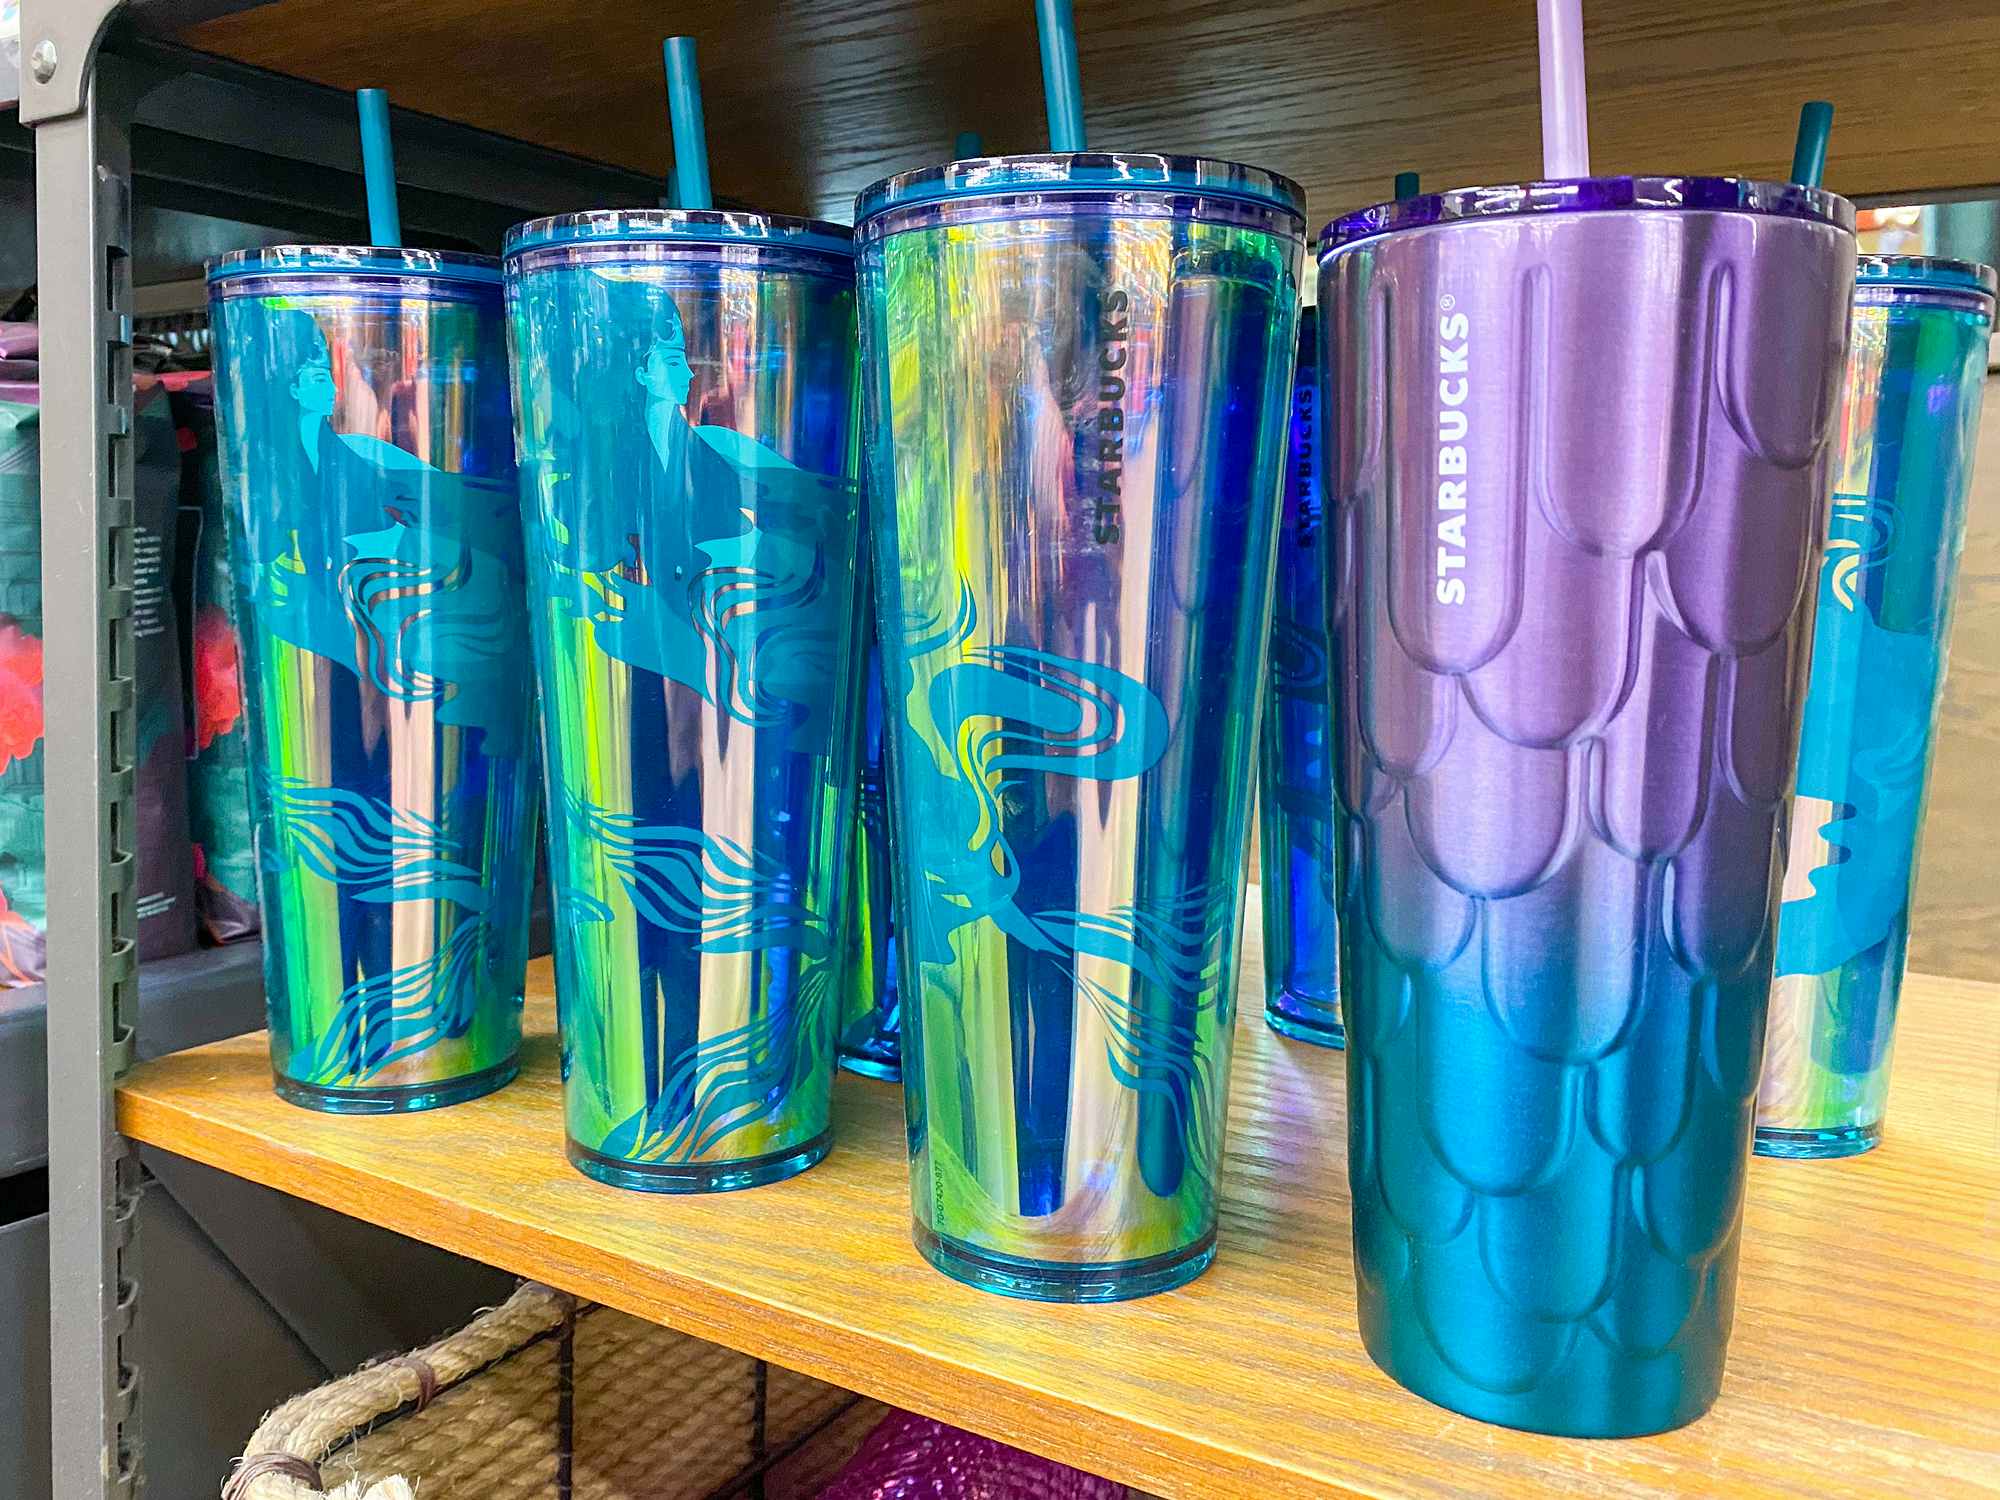 https://prod-cdn-thekrazycouponlady.imgix.net/wp-content/uploads/2023/02/0323-starbucks-spring-cups-holographic-mermaid-tumblers-1679667596-1679667596.jpg?auto=format&fit=fill&q=25